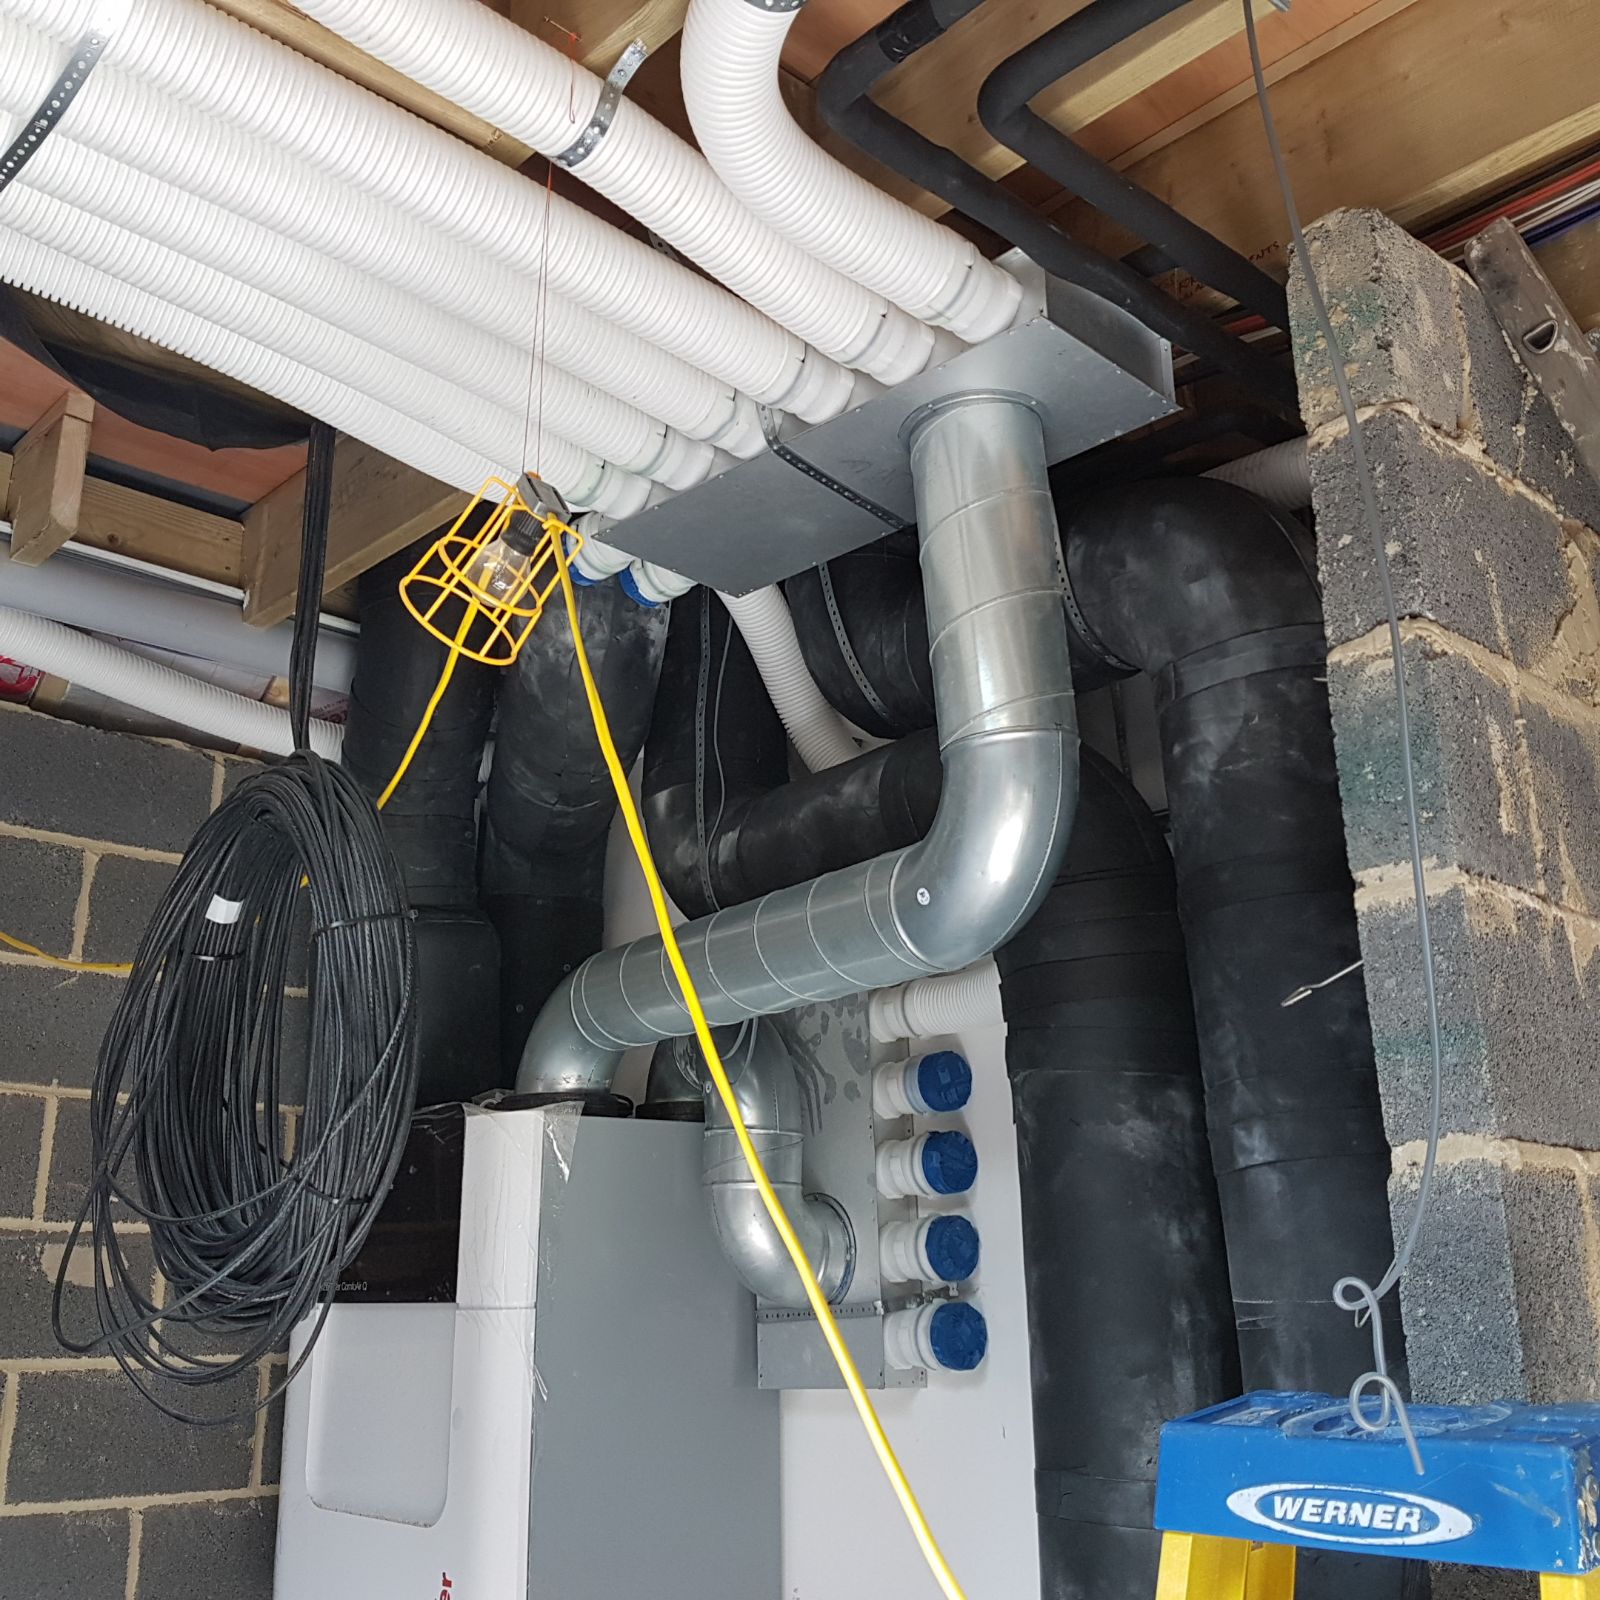 MVHR radial ductwork installed in a manifold system - Enhabit 2019